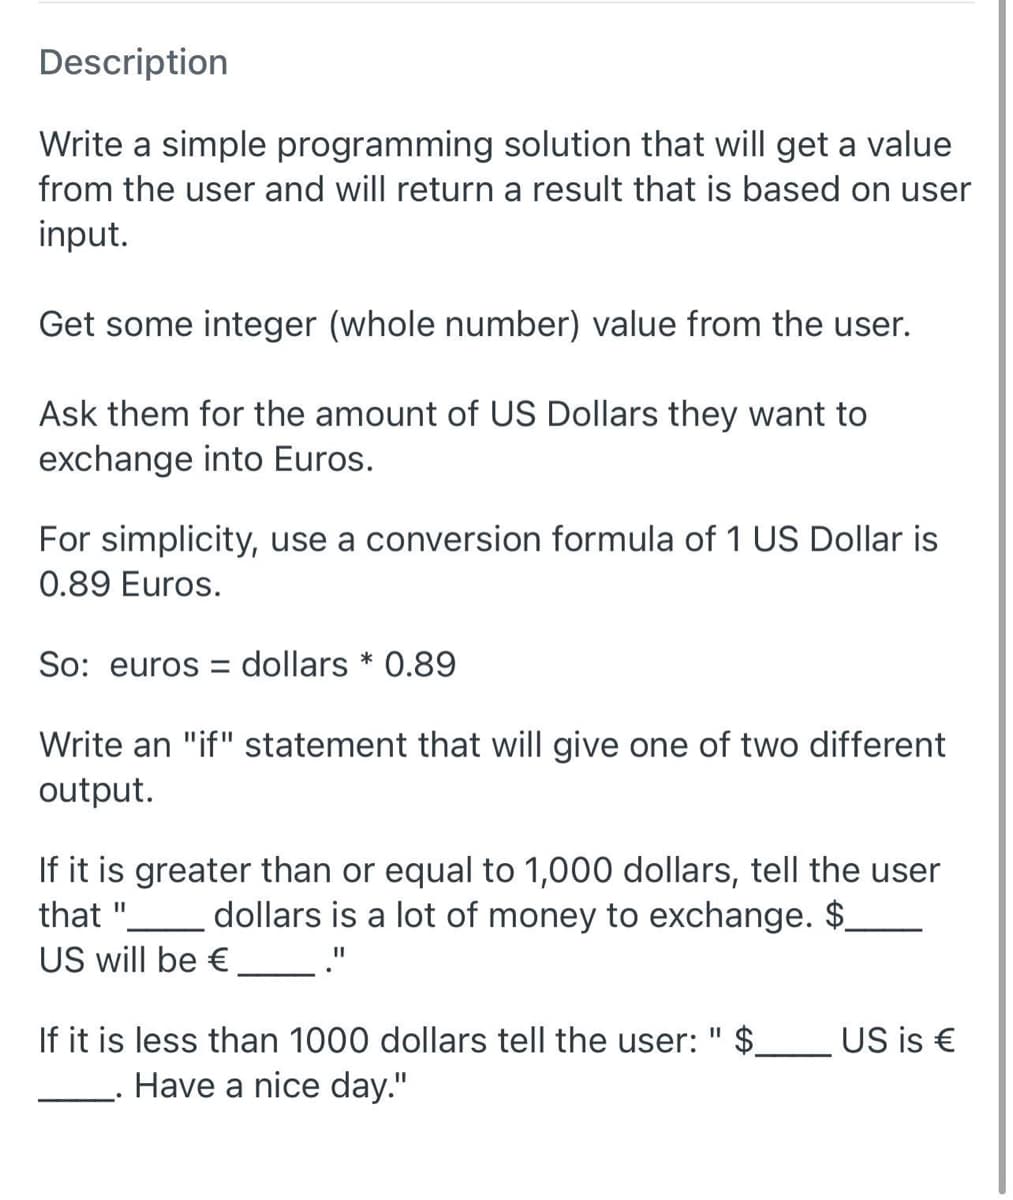 Description
Write a simple programming solution that will get a value
from the user and will return a result that is based on user
input.
Get some integer (whole number) value from the user.
Ask them for the amount of US Dollars they want to
exchange into Euros.
For simplicity, use a conversion formula of 1 US Dollar is
0.89 Euros.
So: euros = dollars * 0.89
Write an "if" statement that will give one of two different
output.
If it is greater than or equal to 1,000 dollars, tell the user
that ".
US will be €
dollars is a lot of money to exchange. $_
If it is less than 1000 dollars tell the user: " $.
US is €
Have a nice day."
